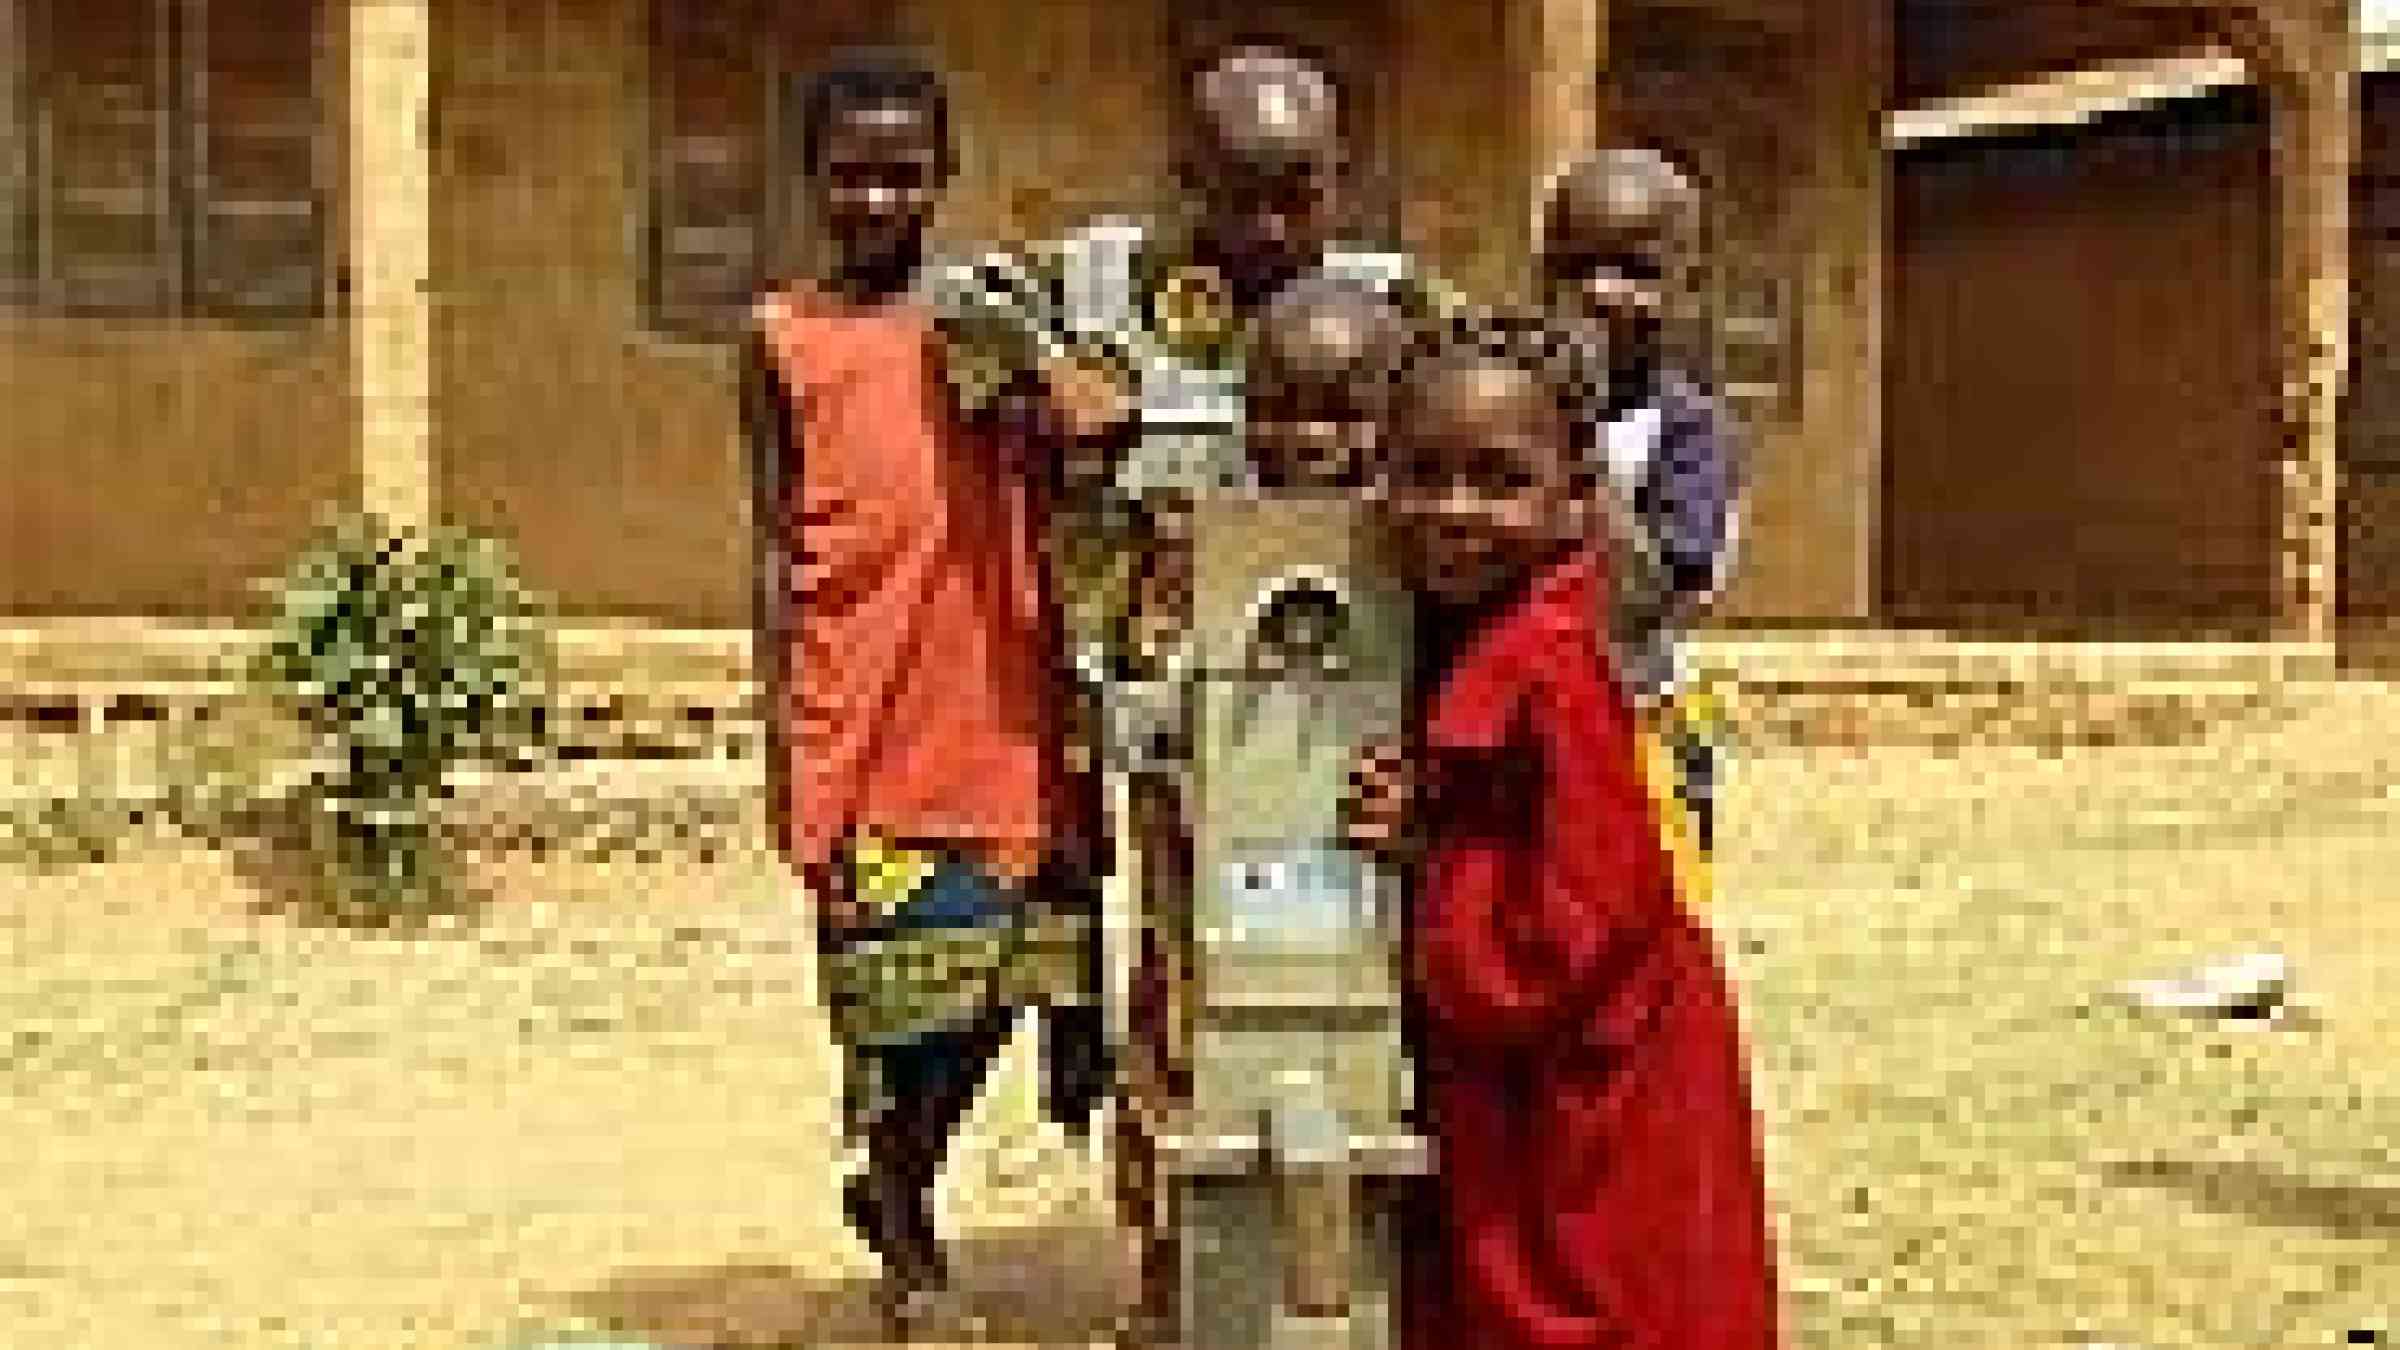 Photo of children at Nenwe central waterpump in Nigeria by Flickr user Pjotter05 Creative Commons Attribution-Noncommercial-No Derivative Works 2.0 Generic